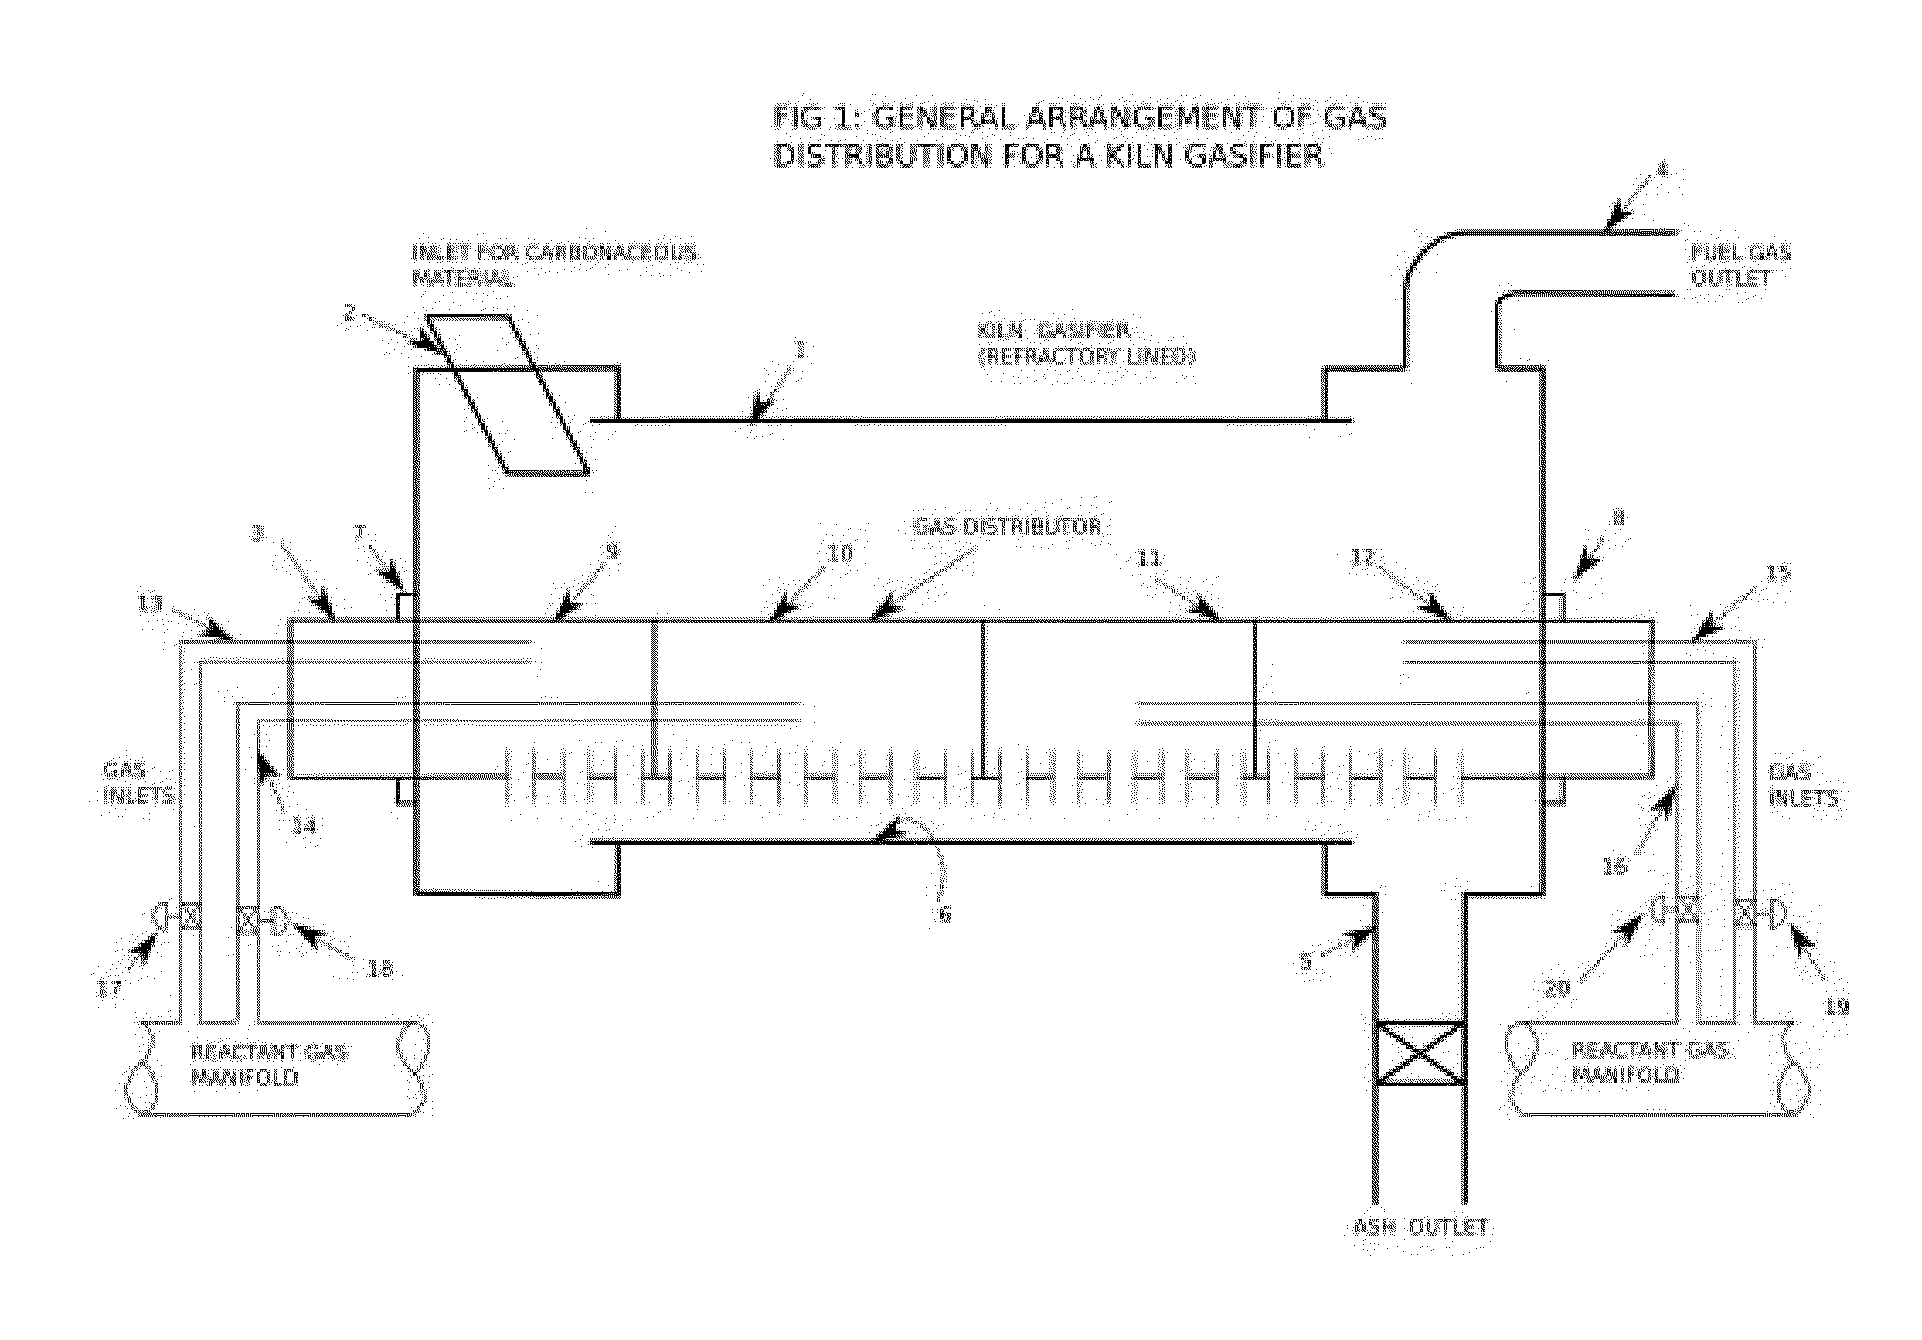 Gas distribution arrangement for rotary reactor